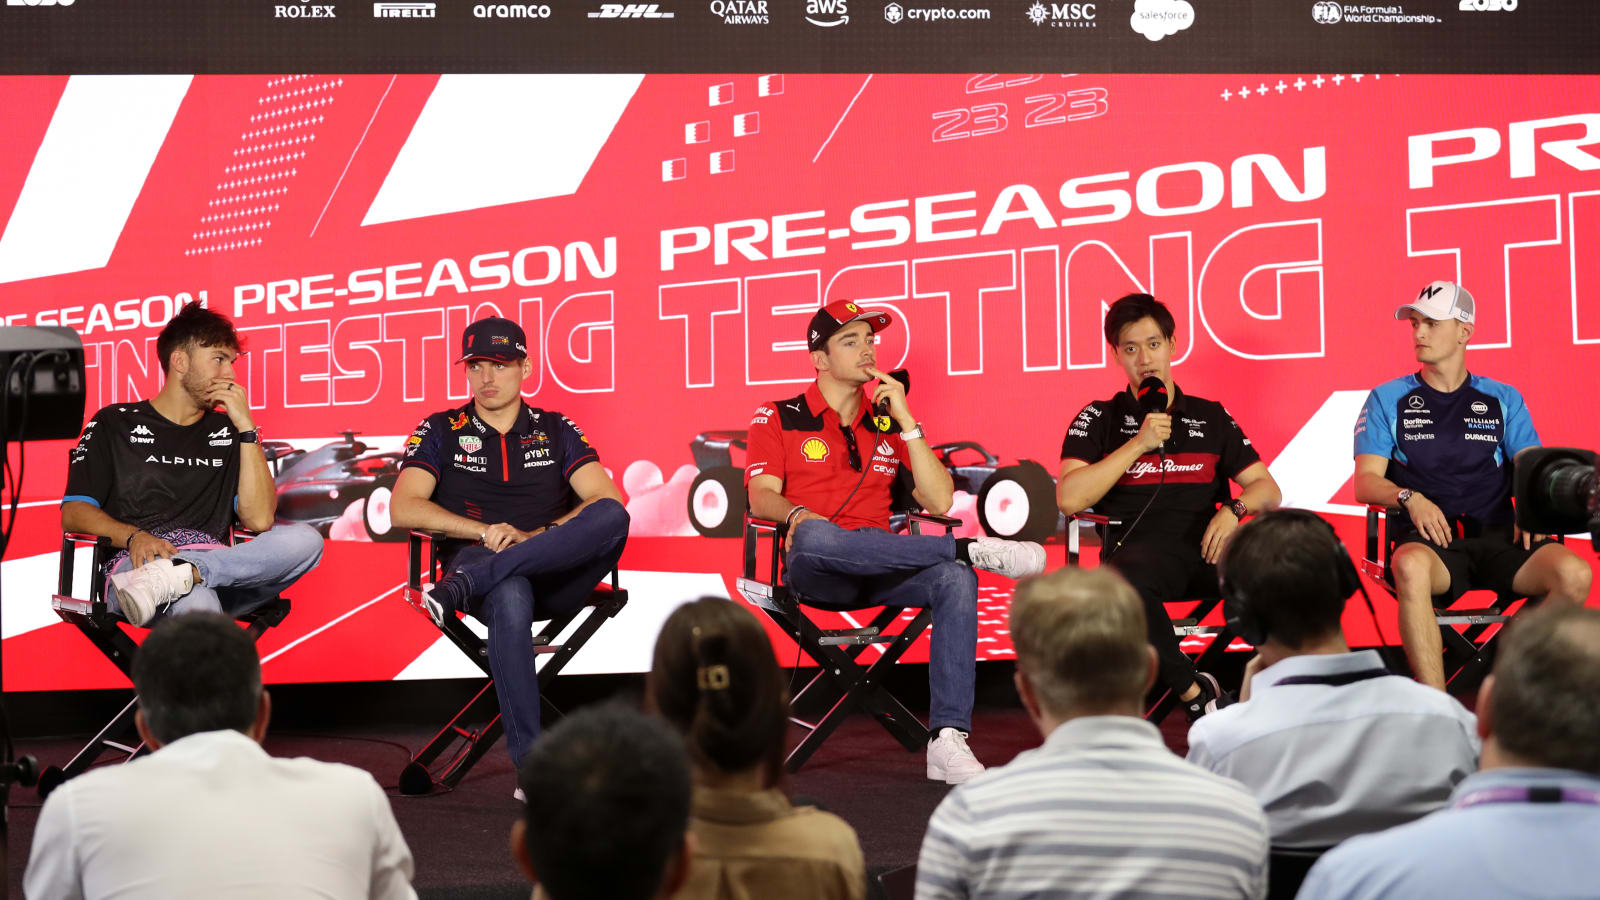 BAHRAIN, BAHRAIN - FEBRUARY 25: (L-R) Pierre Gasly of France and Alpine F1, Max Verstappen of the Netherlands and Oracle Red Bull Racing, Charles Leclerc of Monaco and Ferrari, Zhou Guanyu of China and Alfa Romeo F1 and Logan Sargeant of United States and Williams attend the Drivers Press Conference during day three of F1 Testing at Bahrain International Circuit on February 25, 2023 in Bahrain, Bahrain. (Photo by Peter Fox/Getty Images)